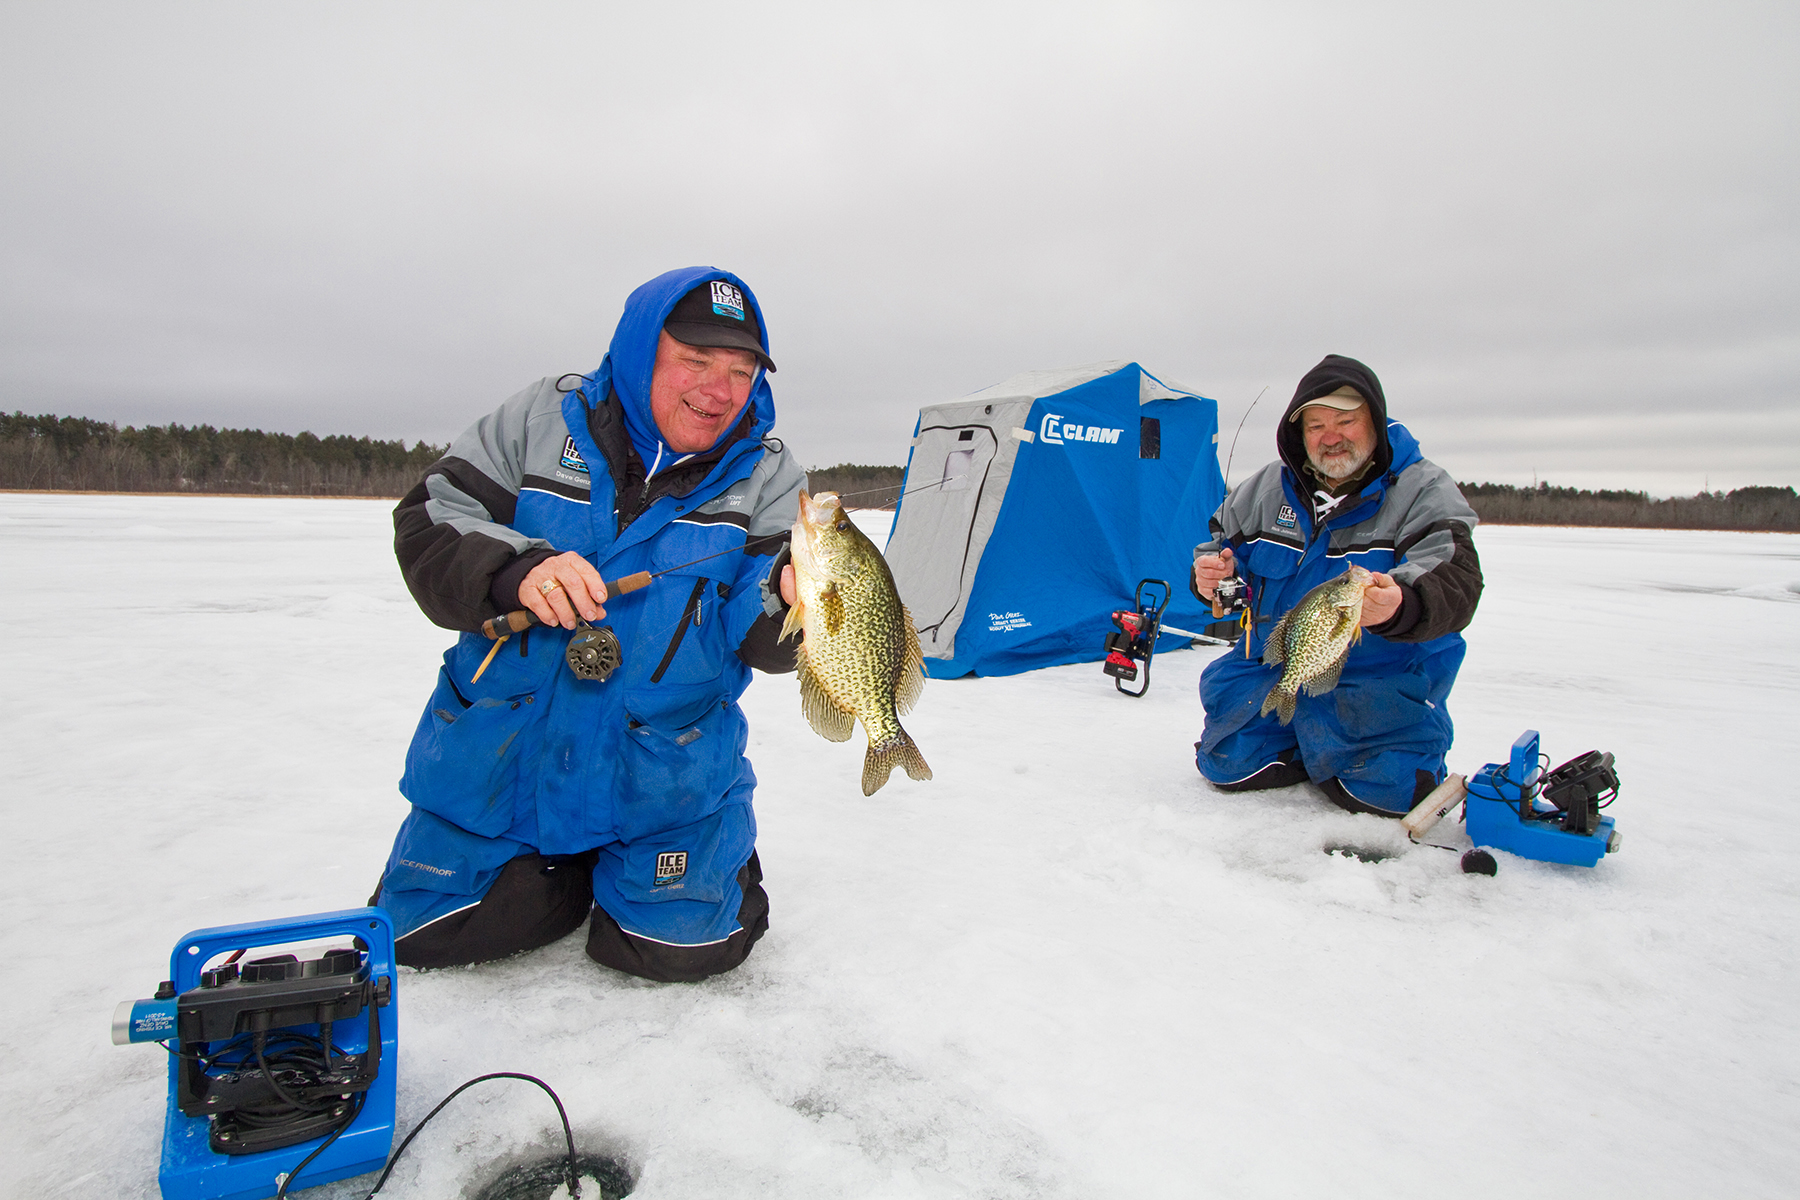 Ice fishing is fun when anglers adhere to safety - Driftwood Outdoors